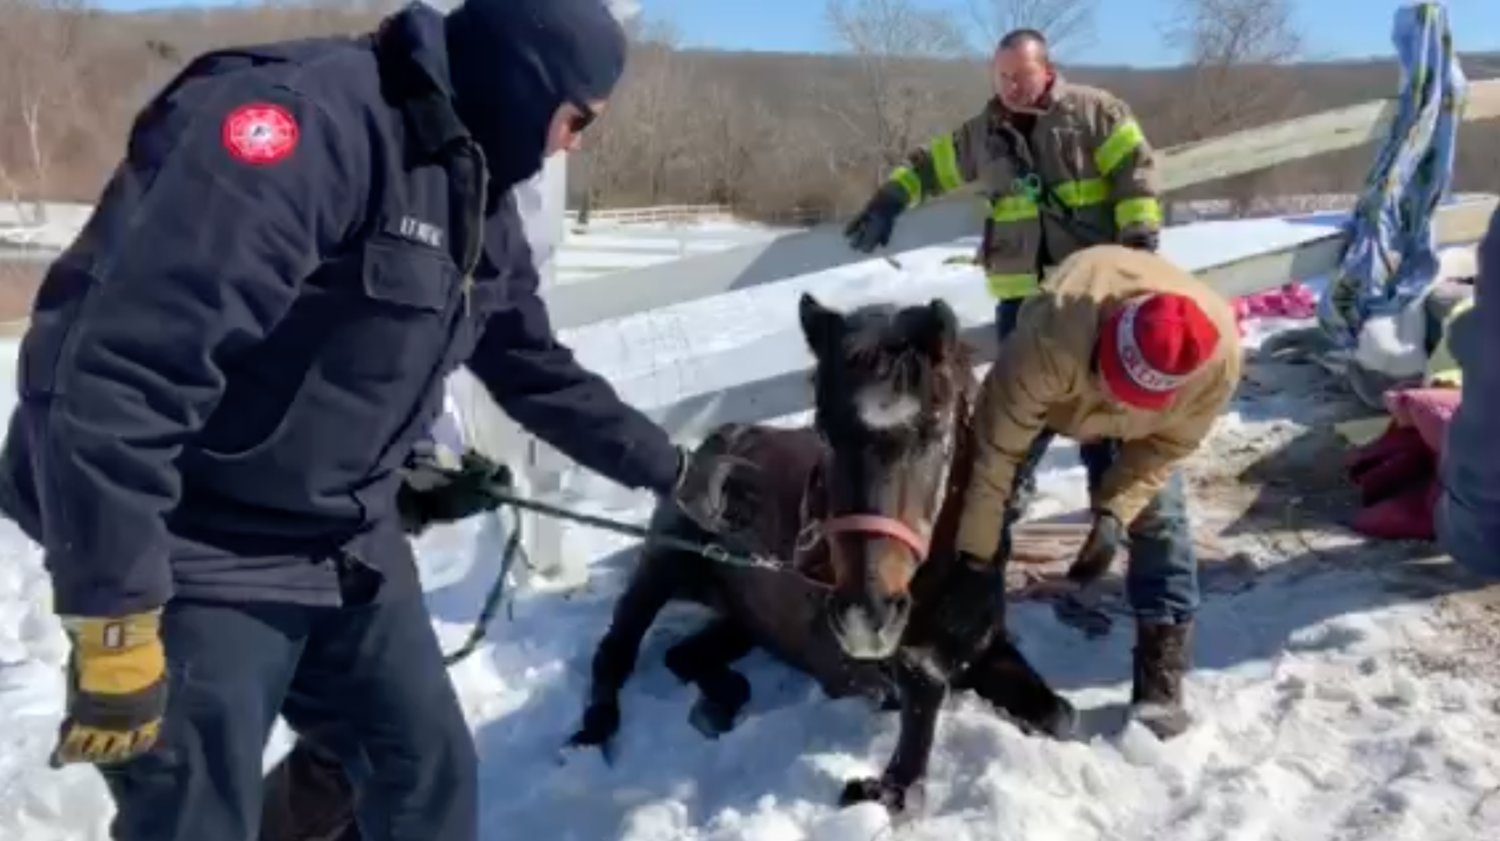 With a helping hand from Wendy Taylor (holding his lead out of sight at left), and Tiverton firefighters, Johnny finally wobbles to his feet and back to the barn